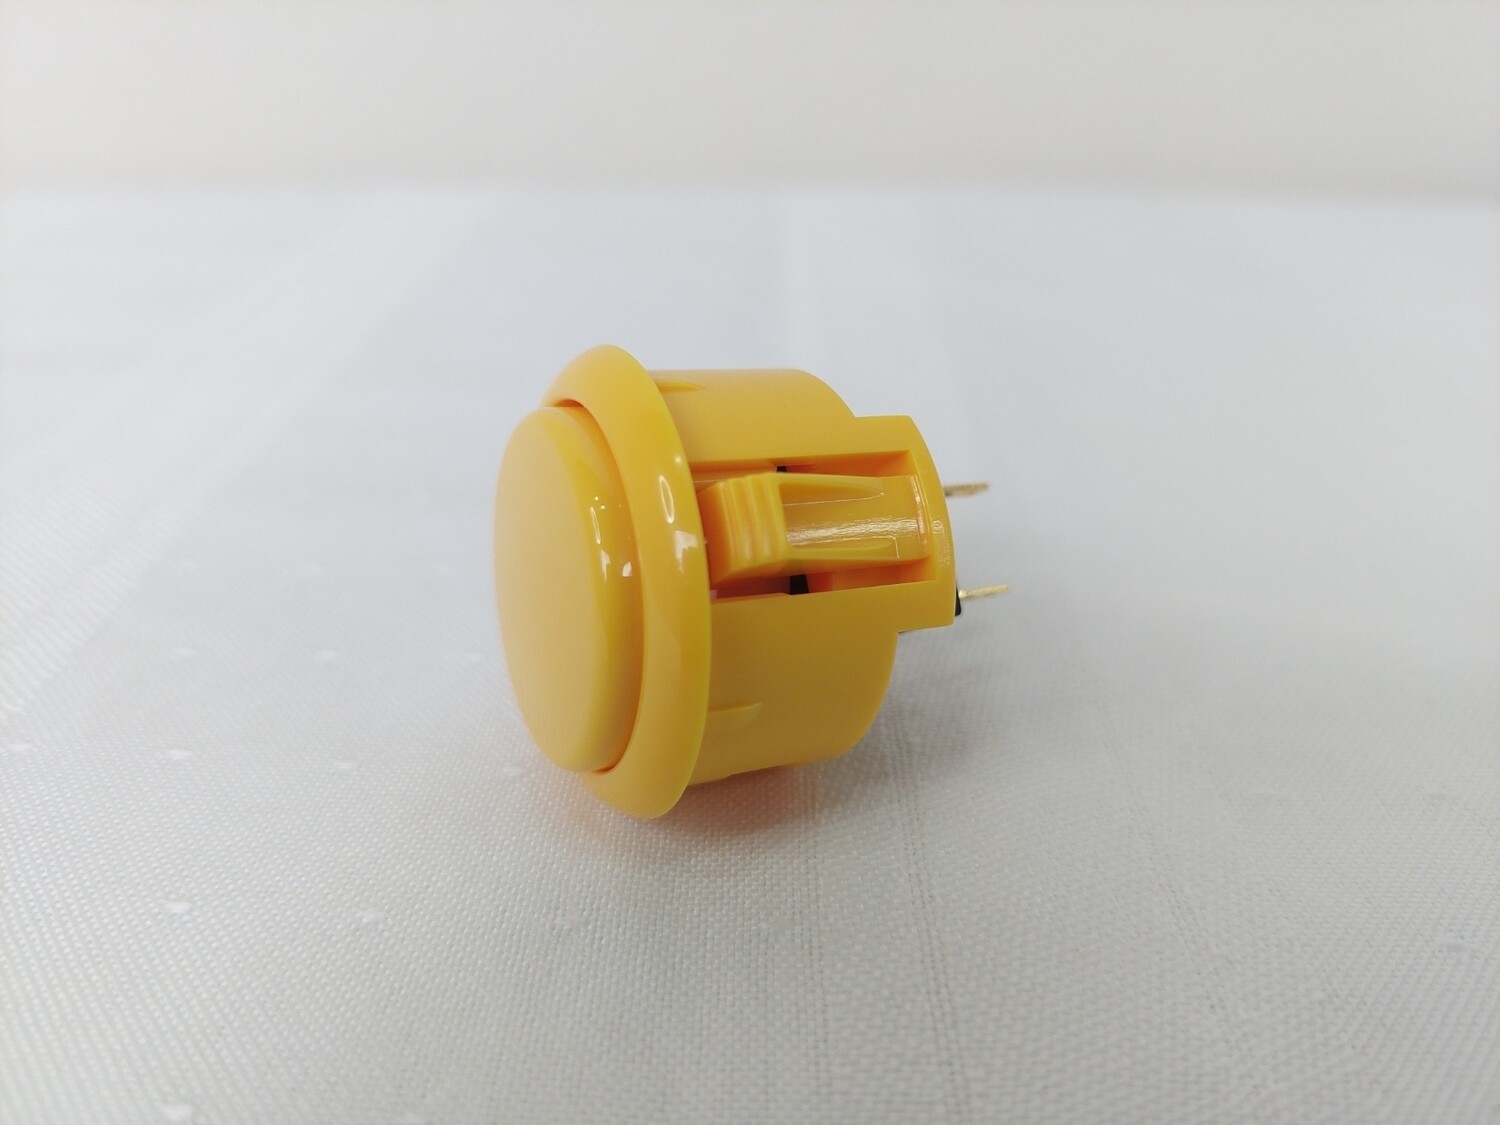 Sanwa OBSF 30mm Pushbuttons Yellow